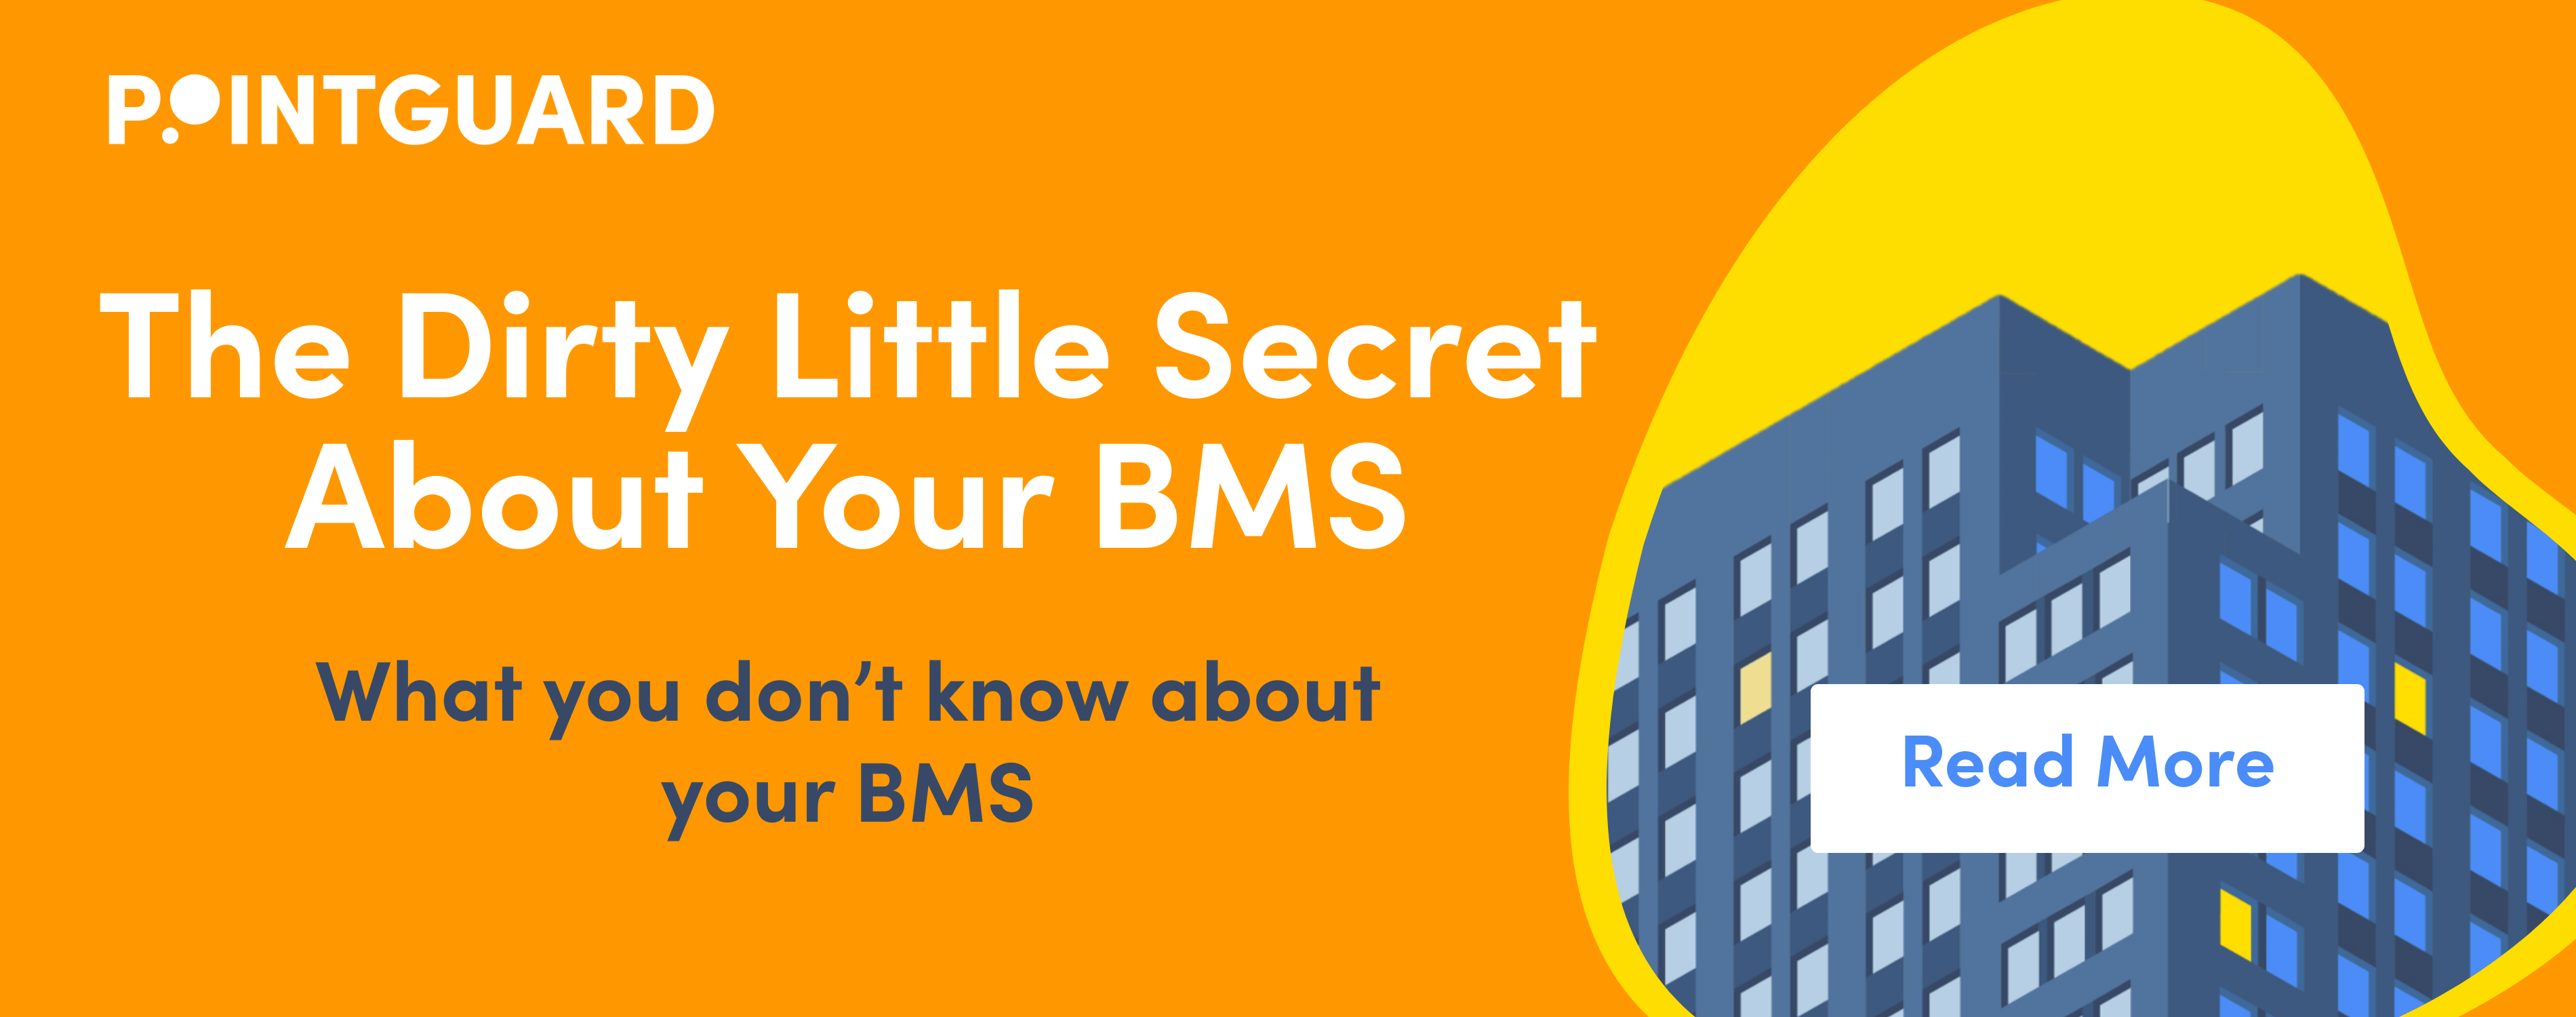 The Dirty Little Secret About Your BMS